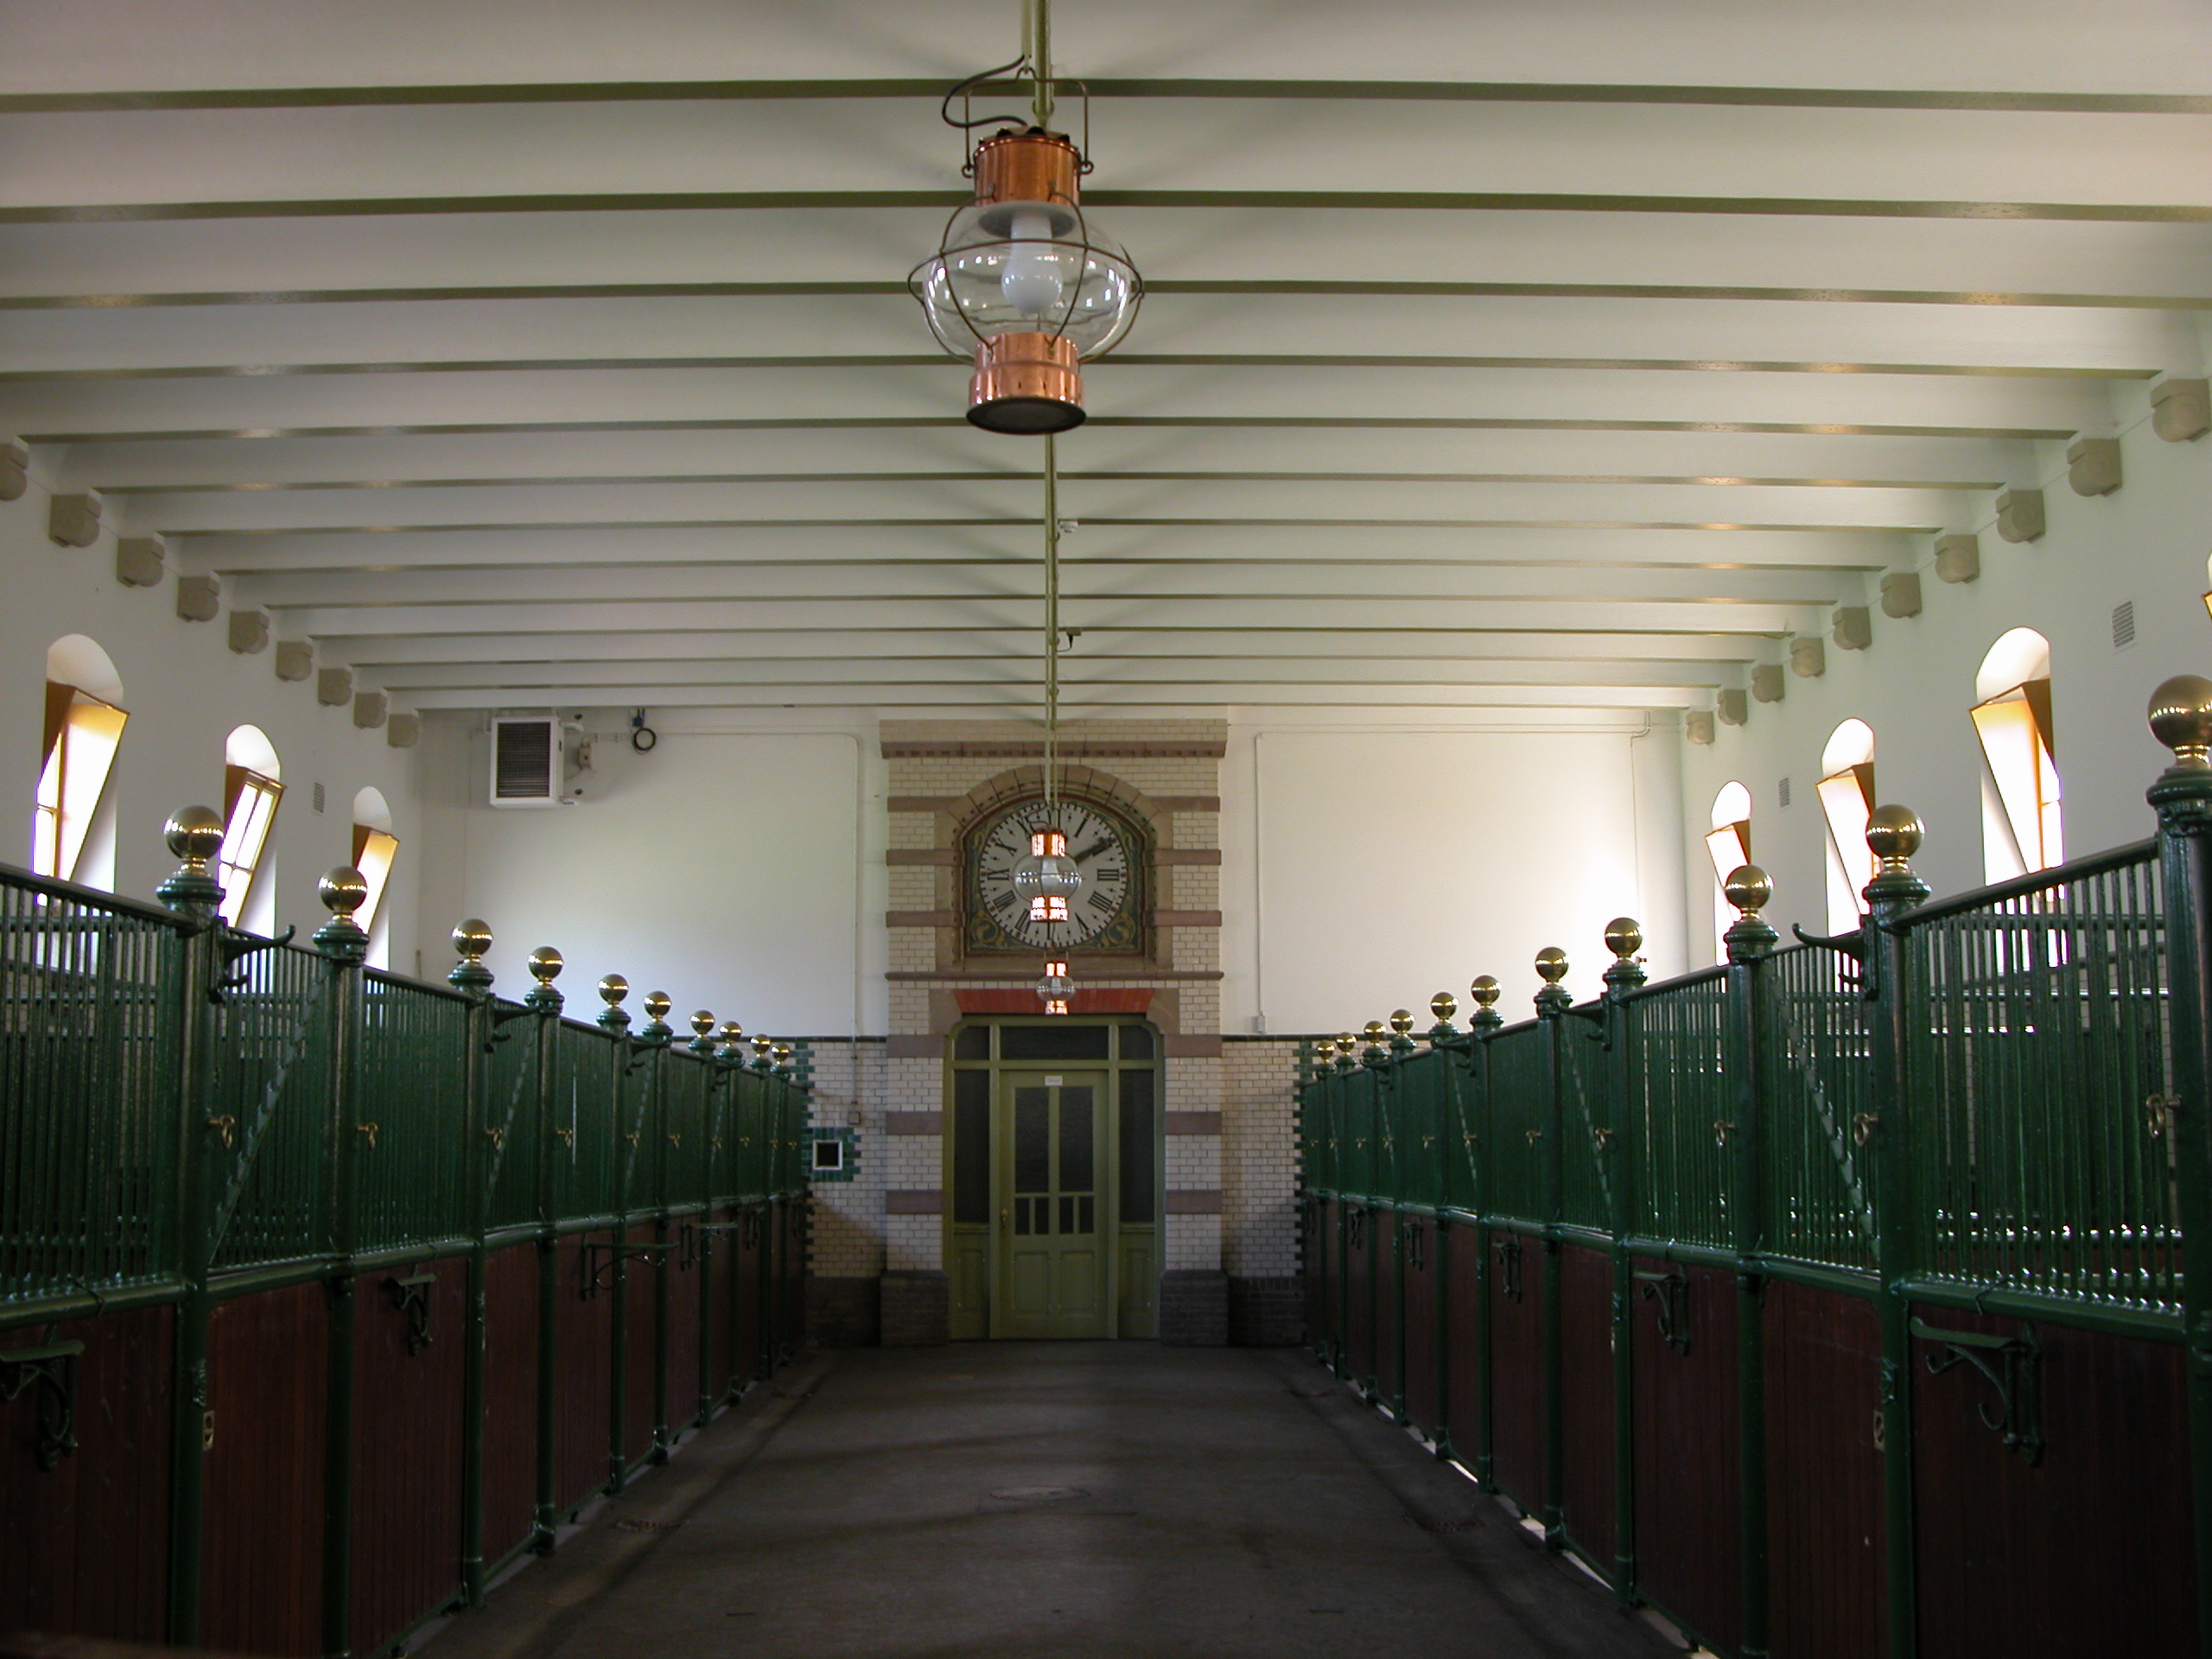 station waiting room rooms gate gates locked old nineteenth 19th century age of steam